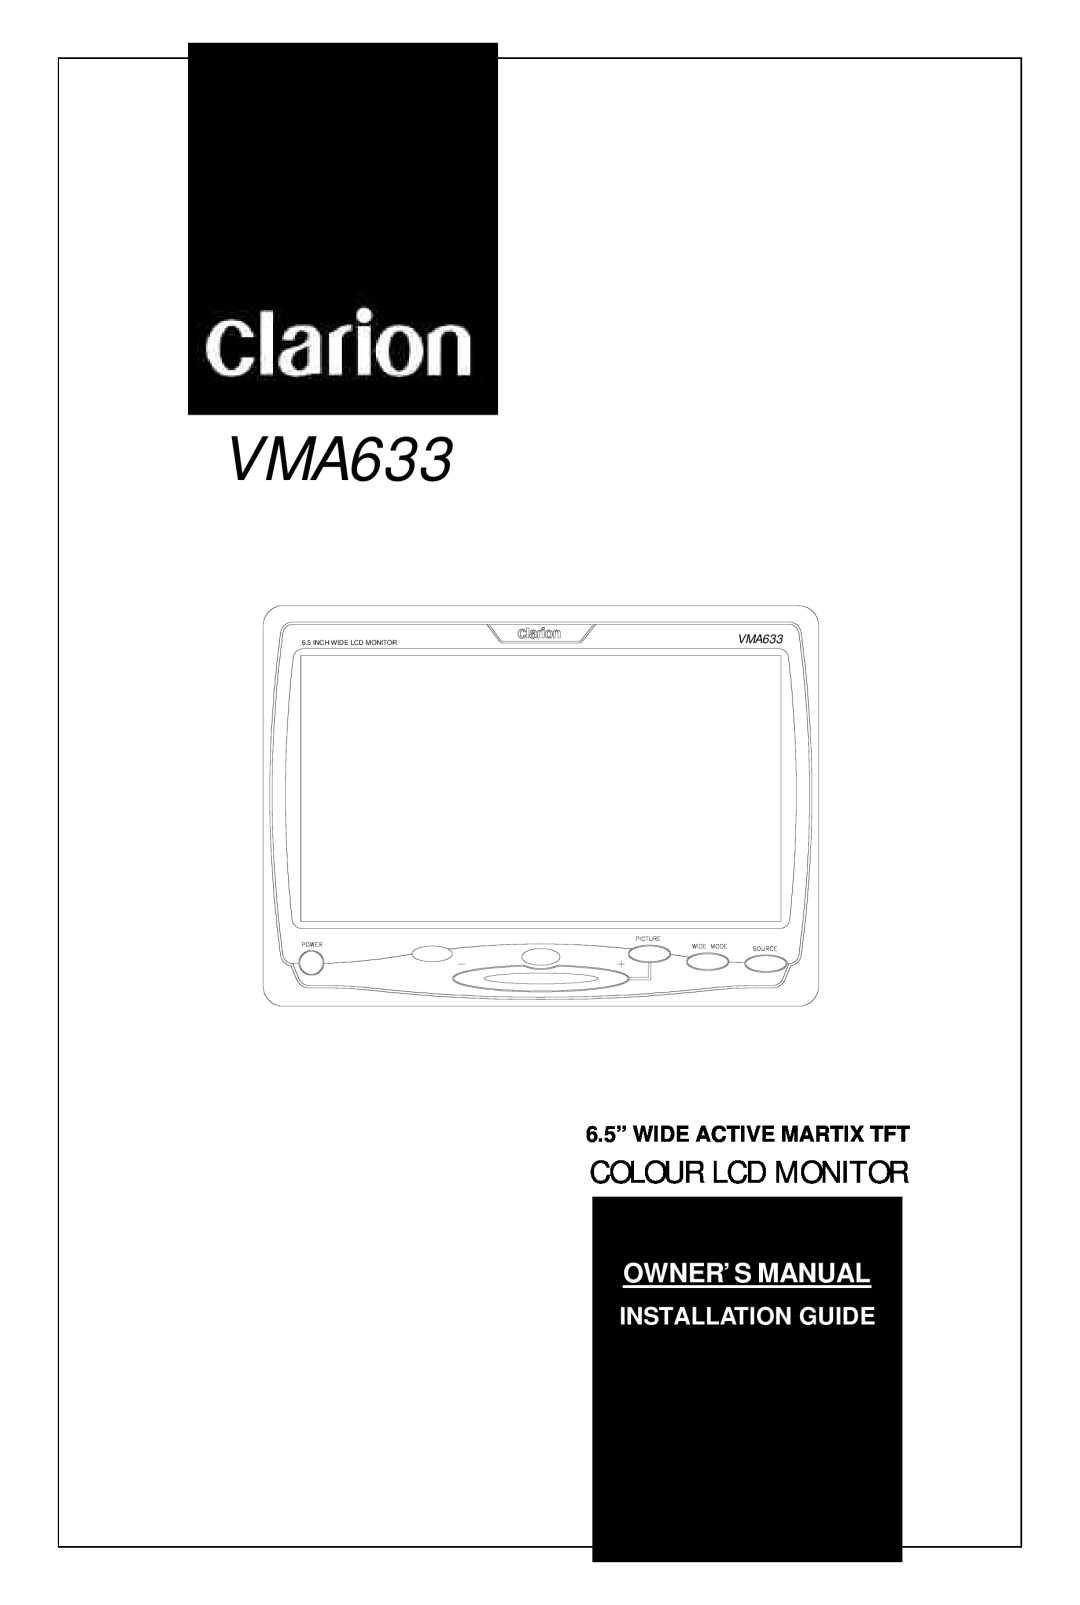 Clarion VMA633 owner manual Colour Lcd Monitor, Owner’S Manual, Installation Guide, Inch Wide Lcd Monitor 